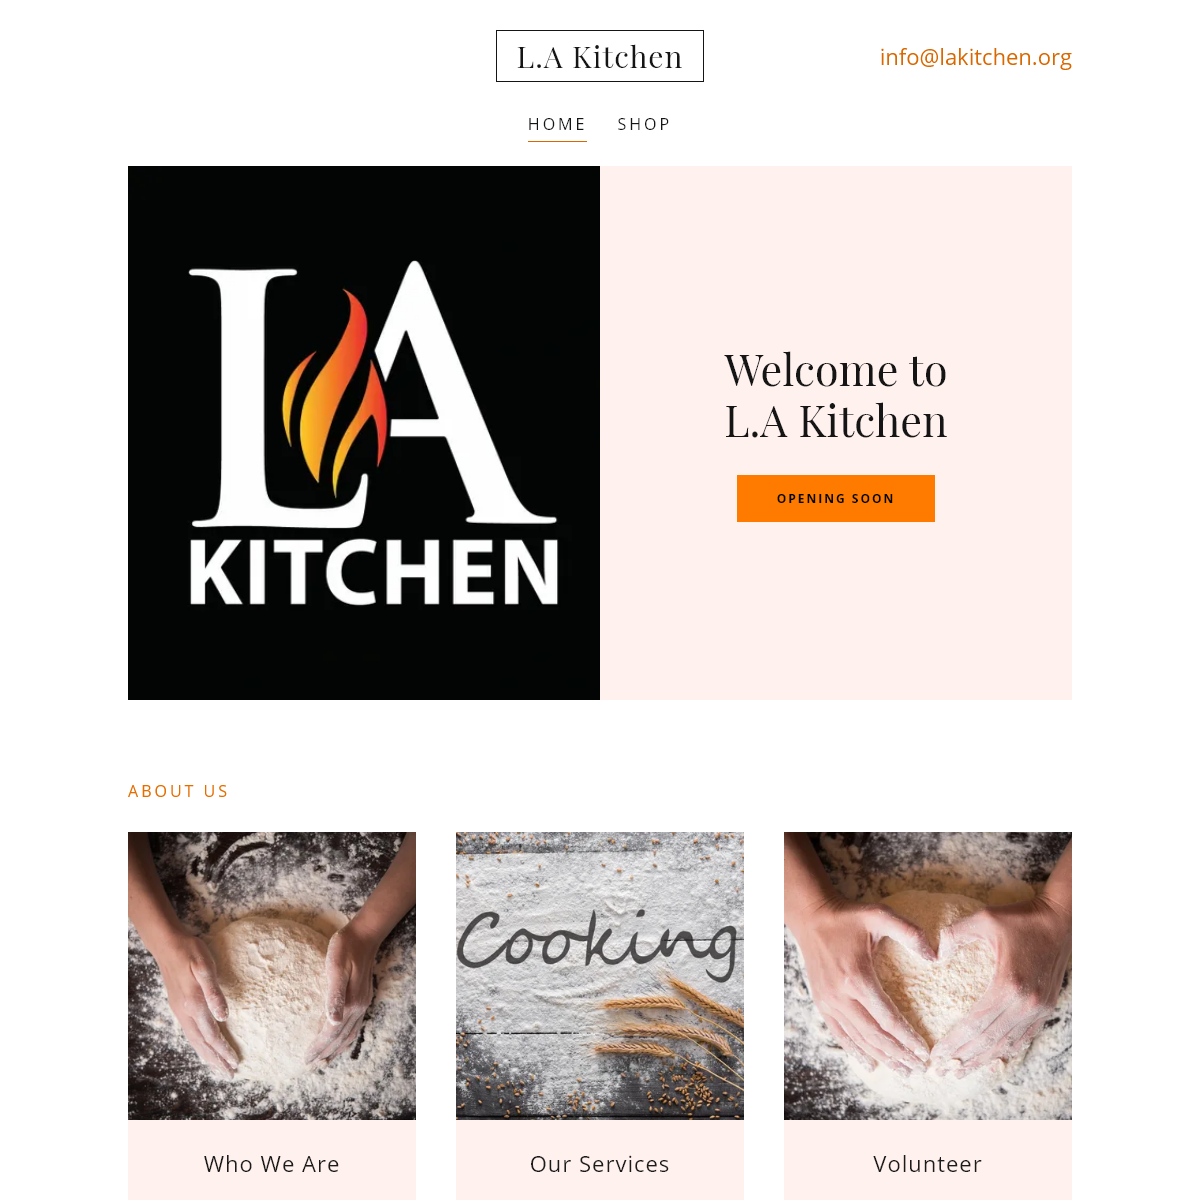 A complete backup of lakitchen.org